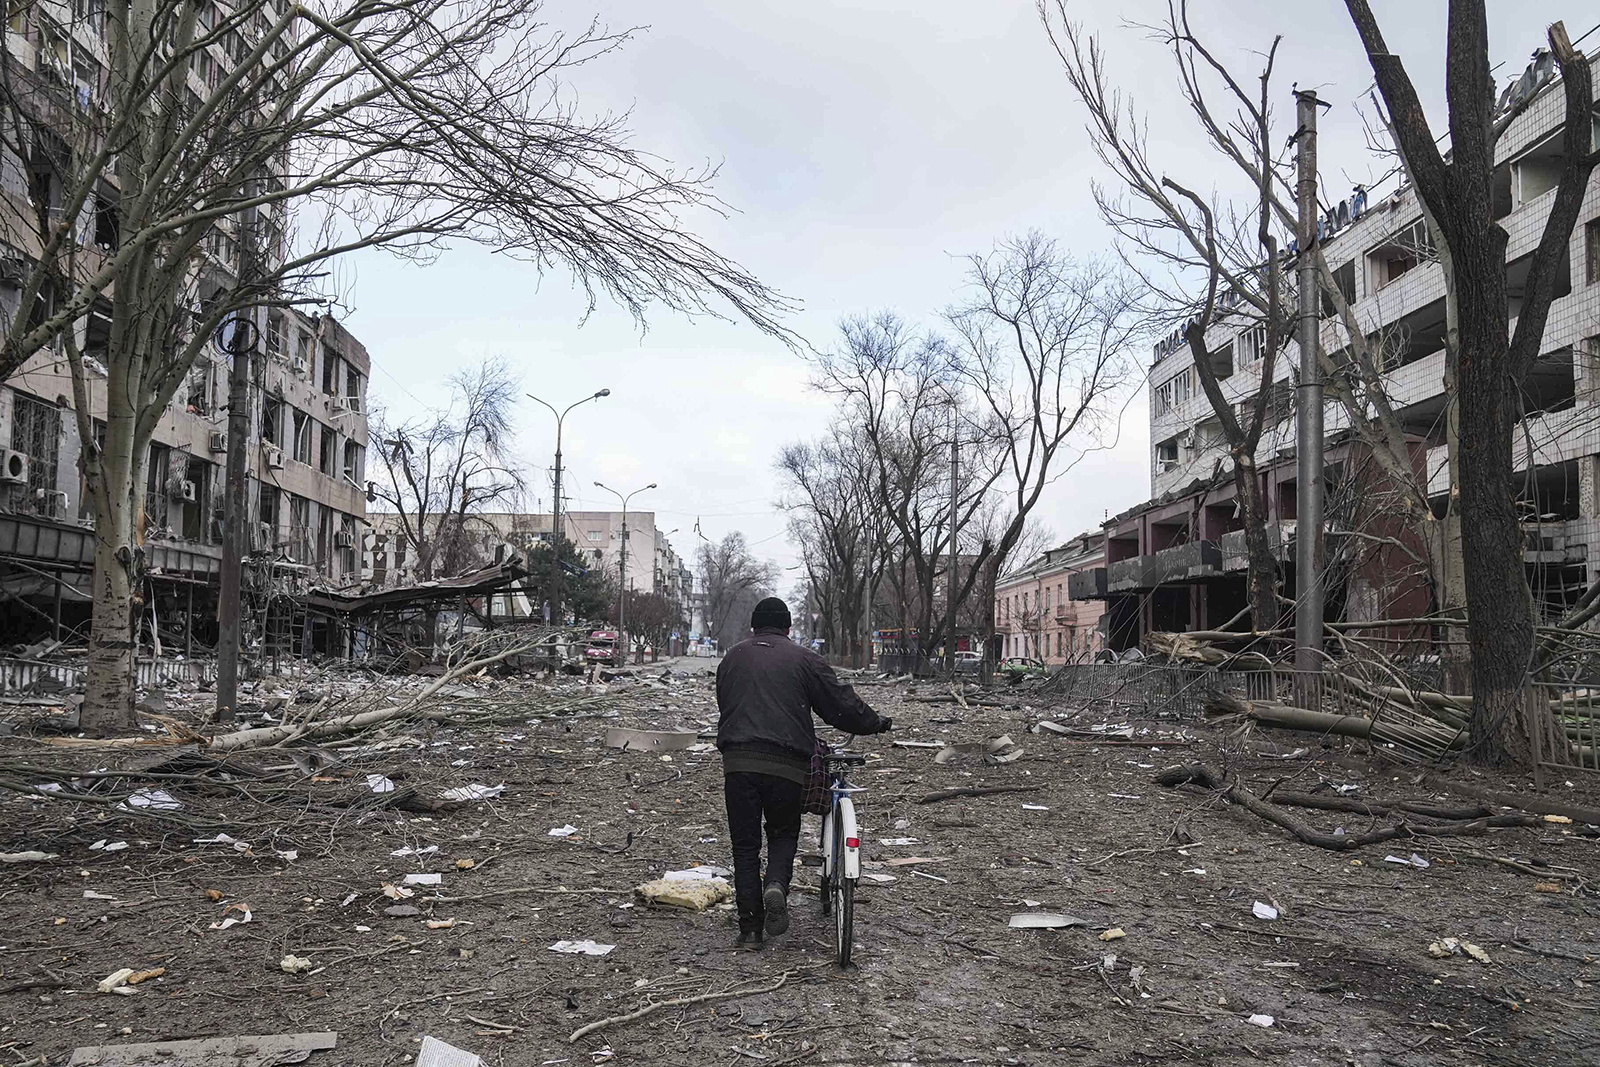 A street damaged by shelling in Mariupol, Ukraine on March 10.